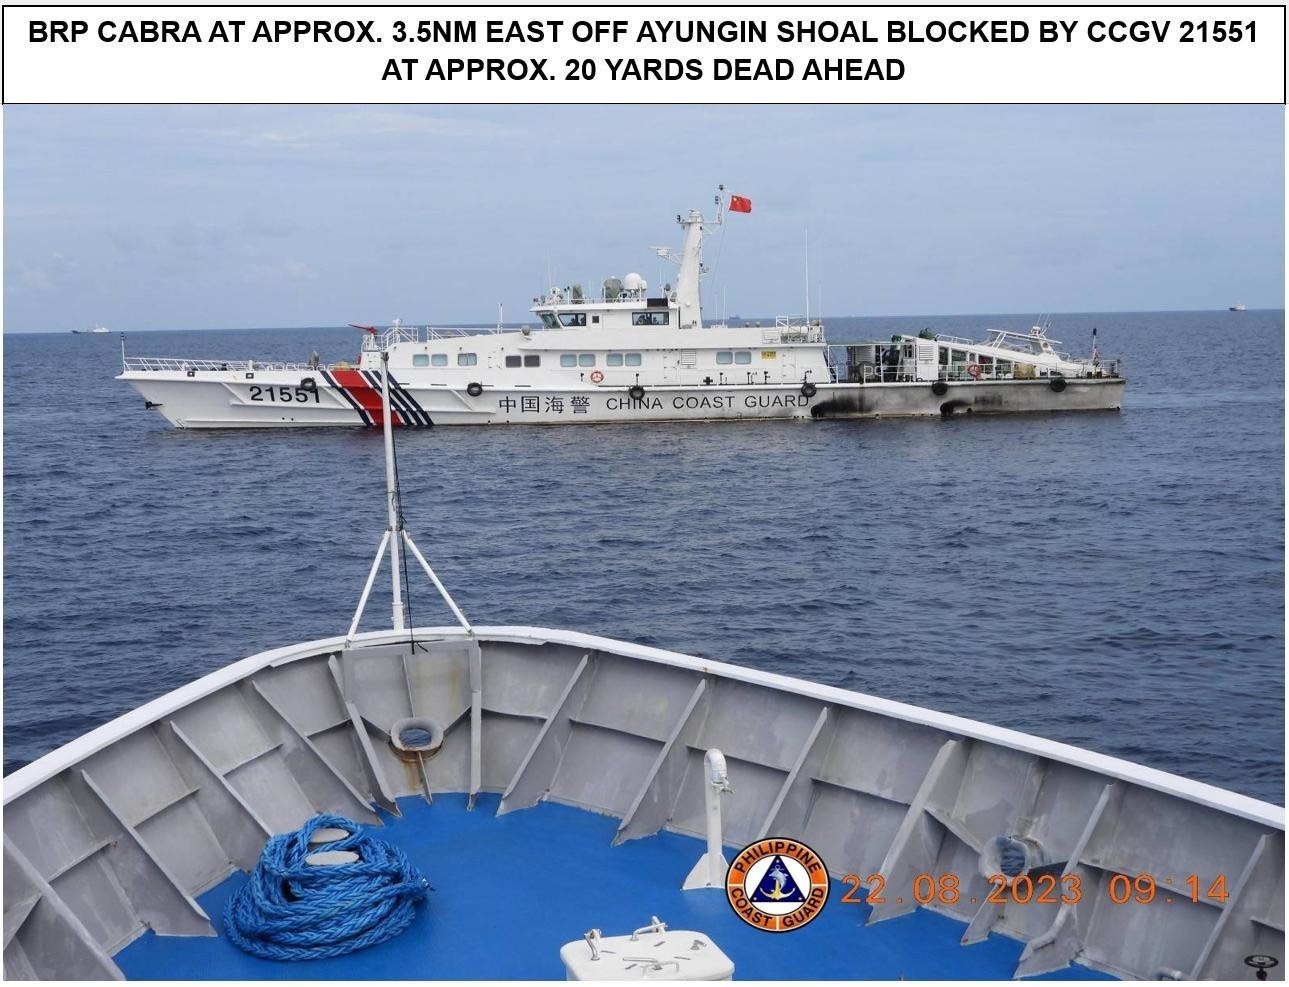 Despite China’s attempt to 'interfere,' PCG says resupply mission to BRP Sierra Madre successful